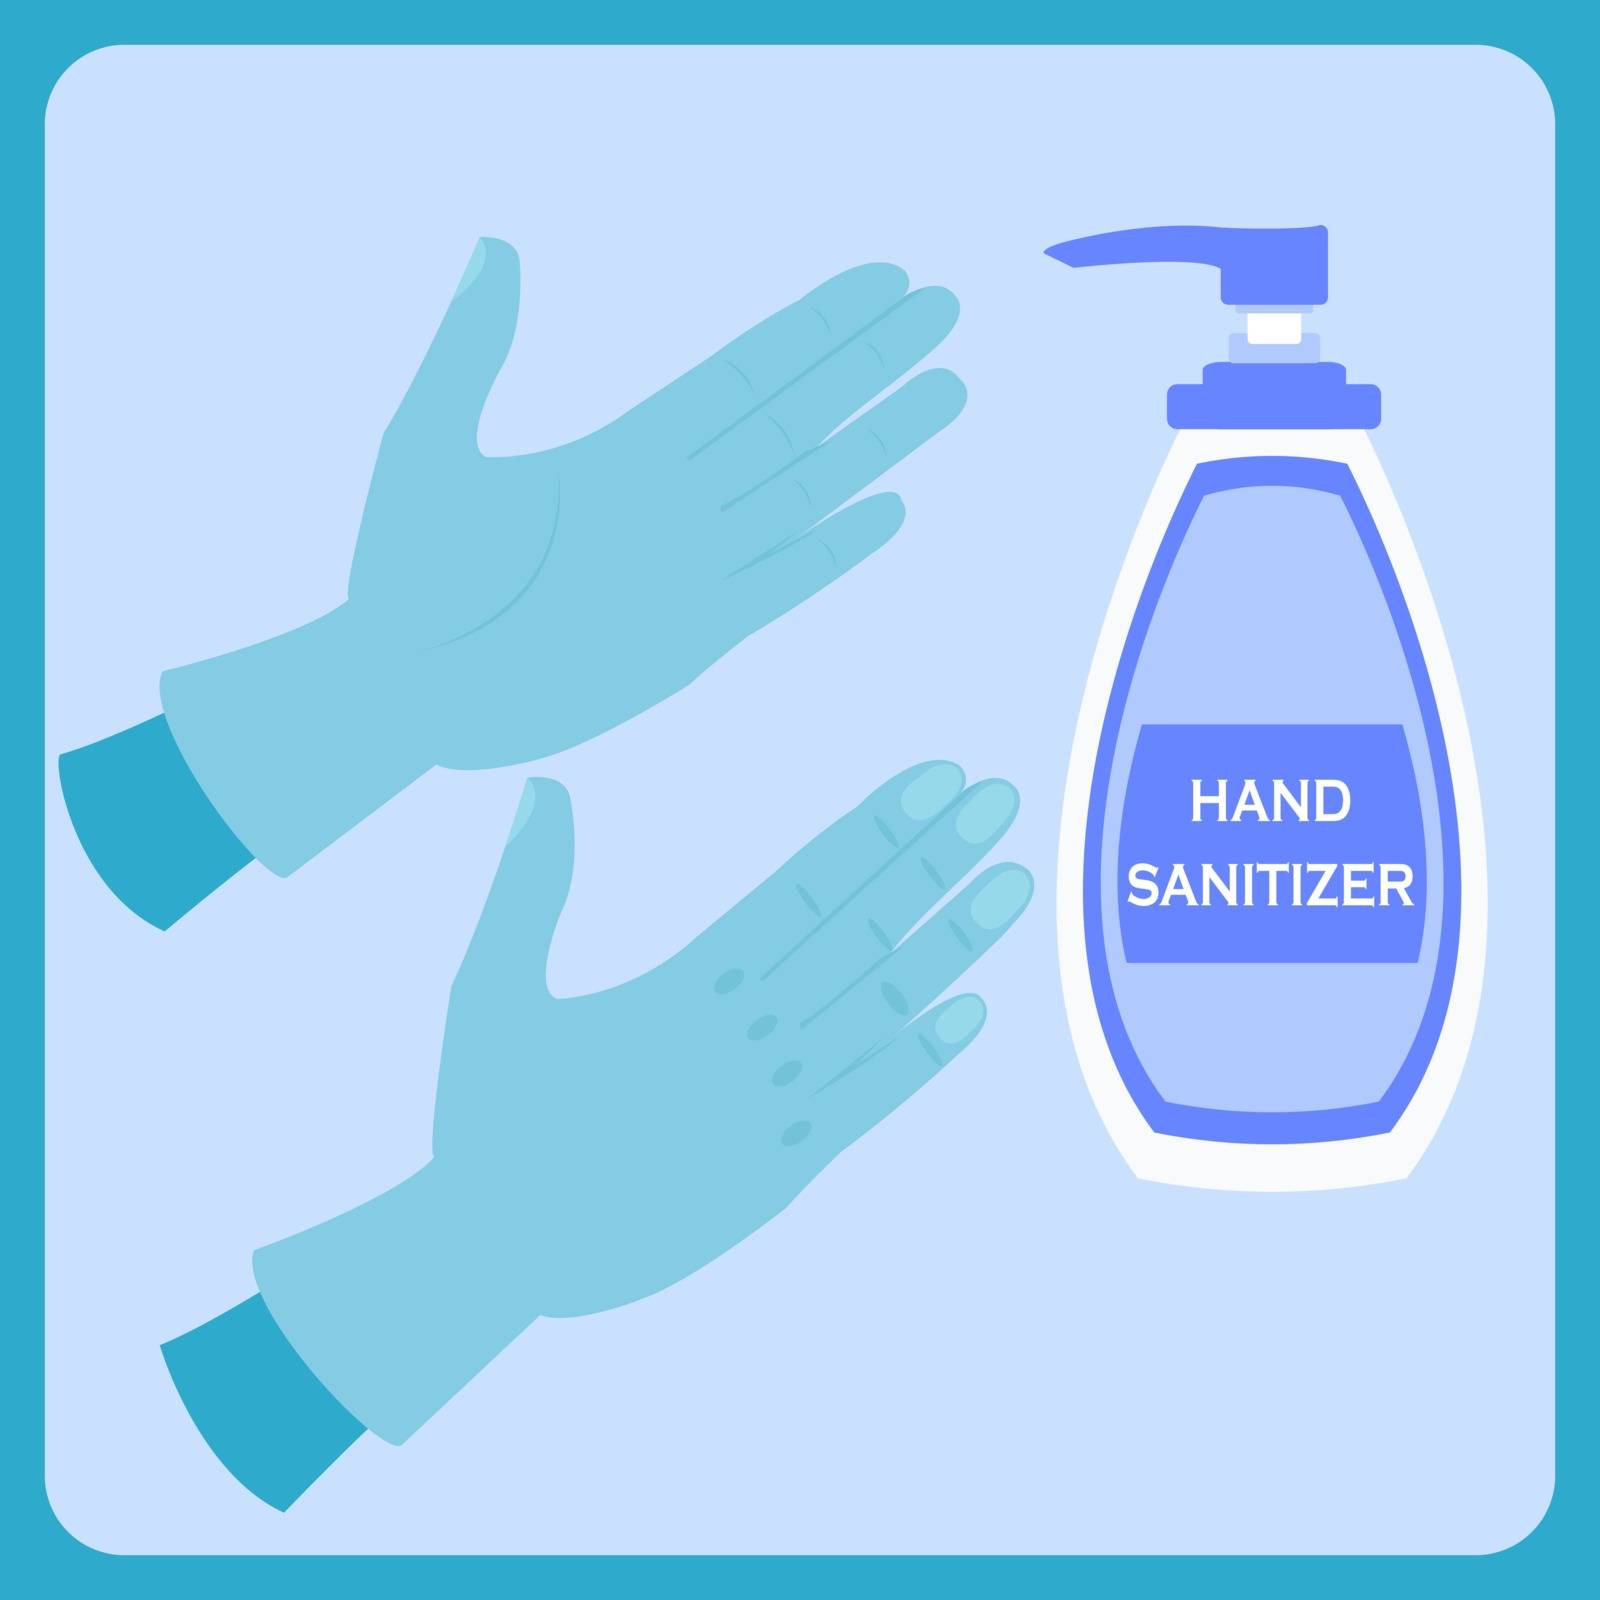 hand gloves and hand sanitizer illustration,symbol of hygiene products